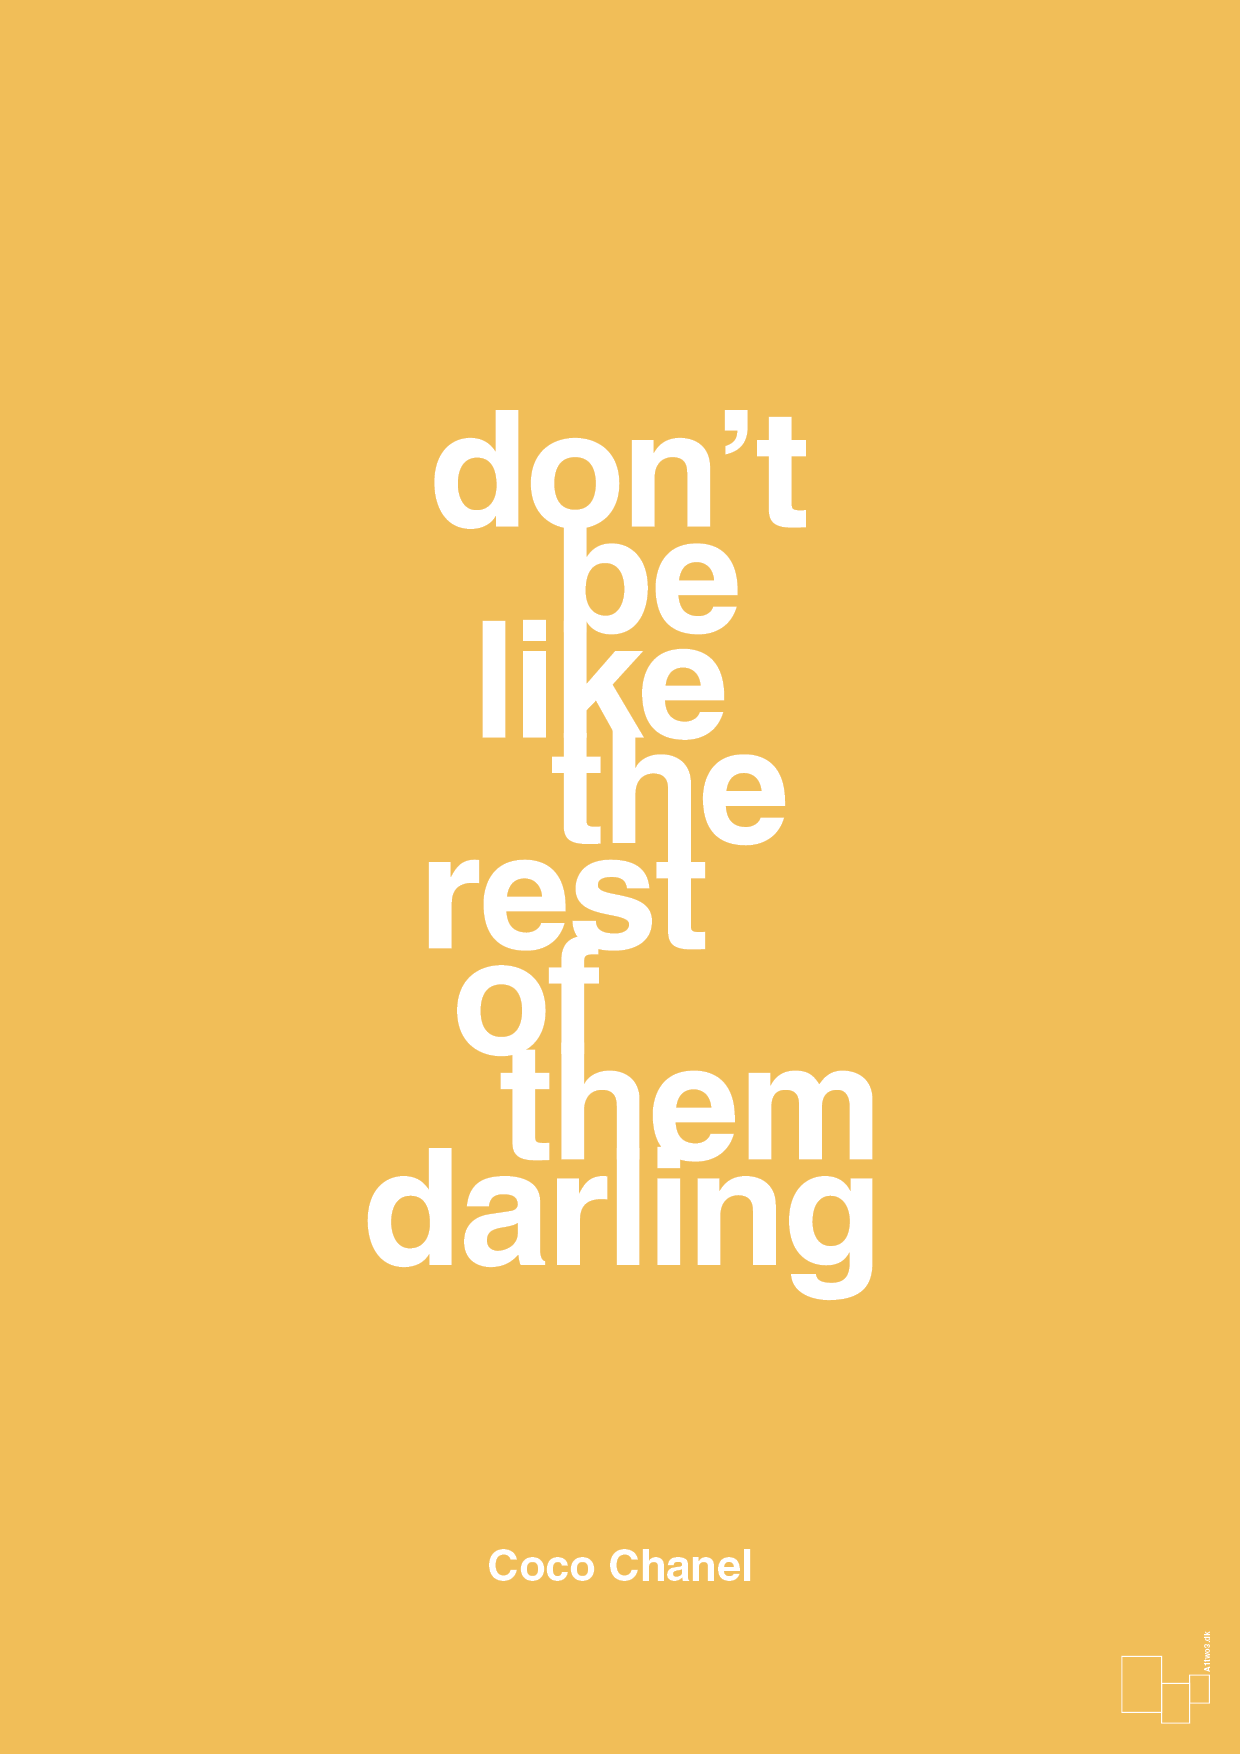 don’t be like the rest of them darling - Plakat med Citater i Honeycomb